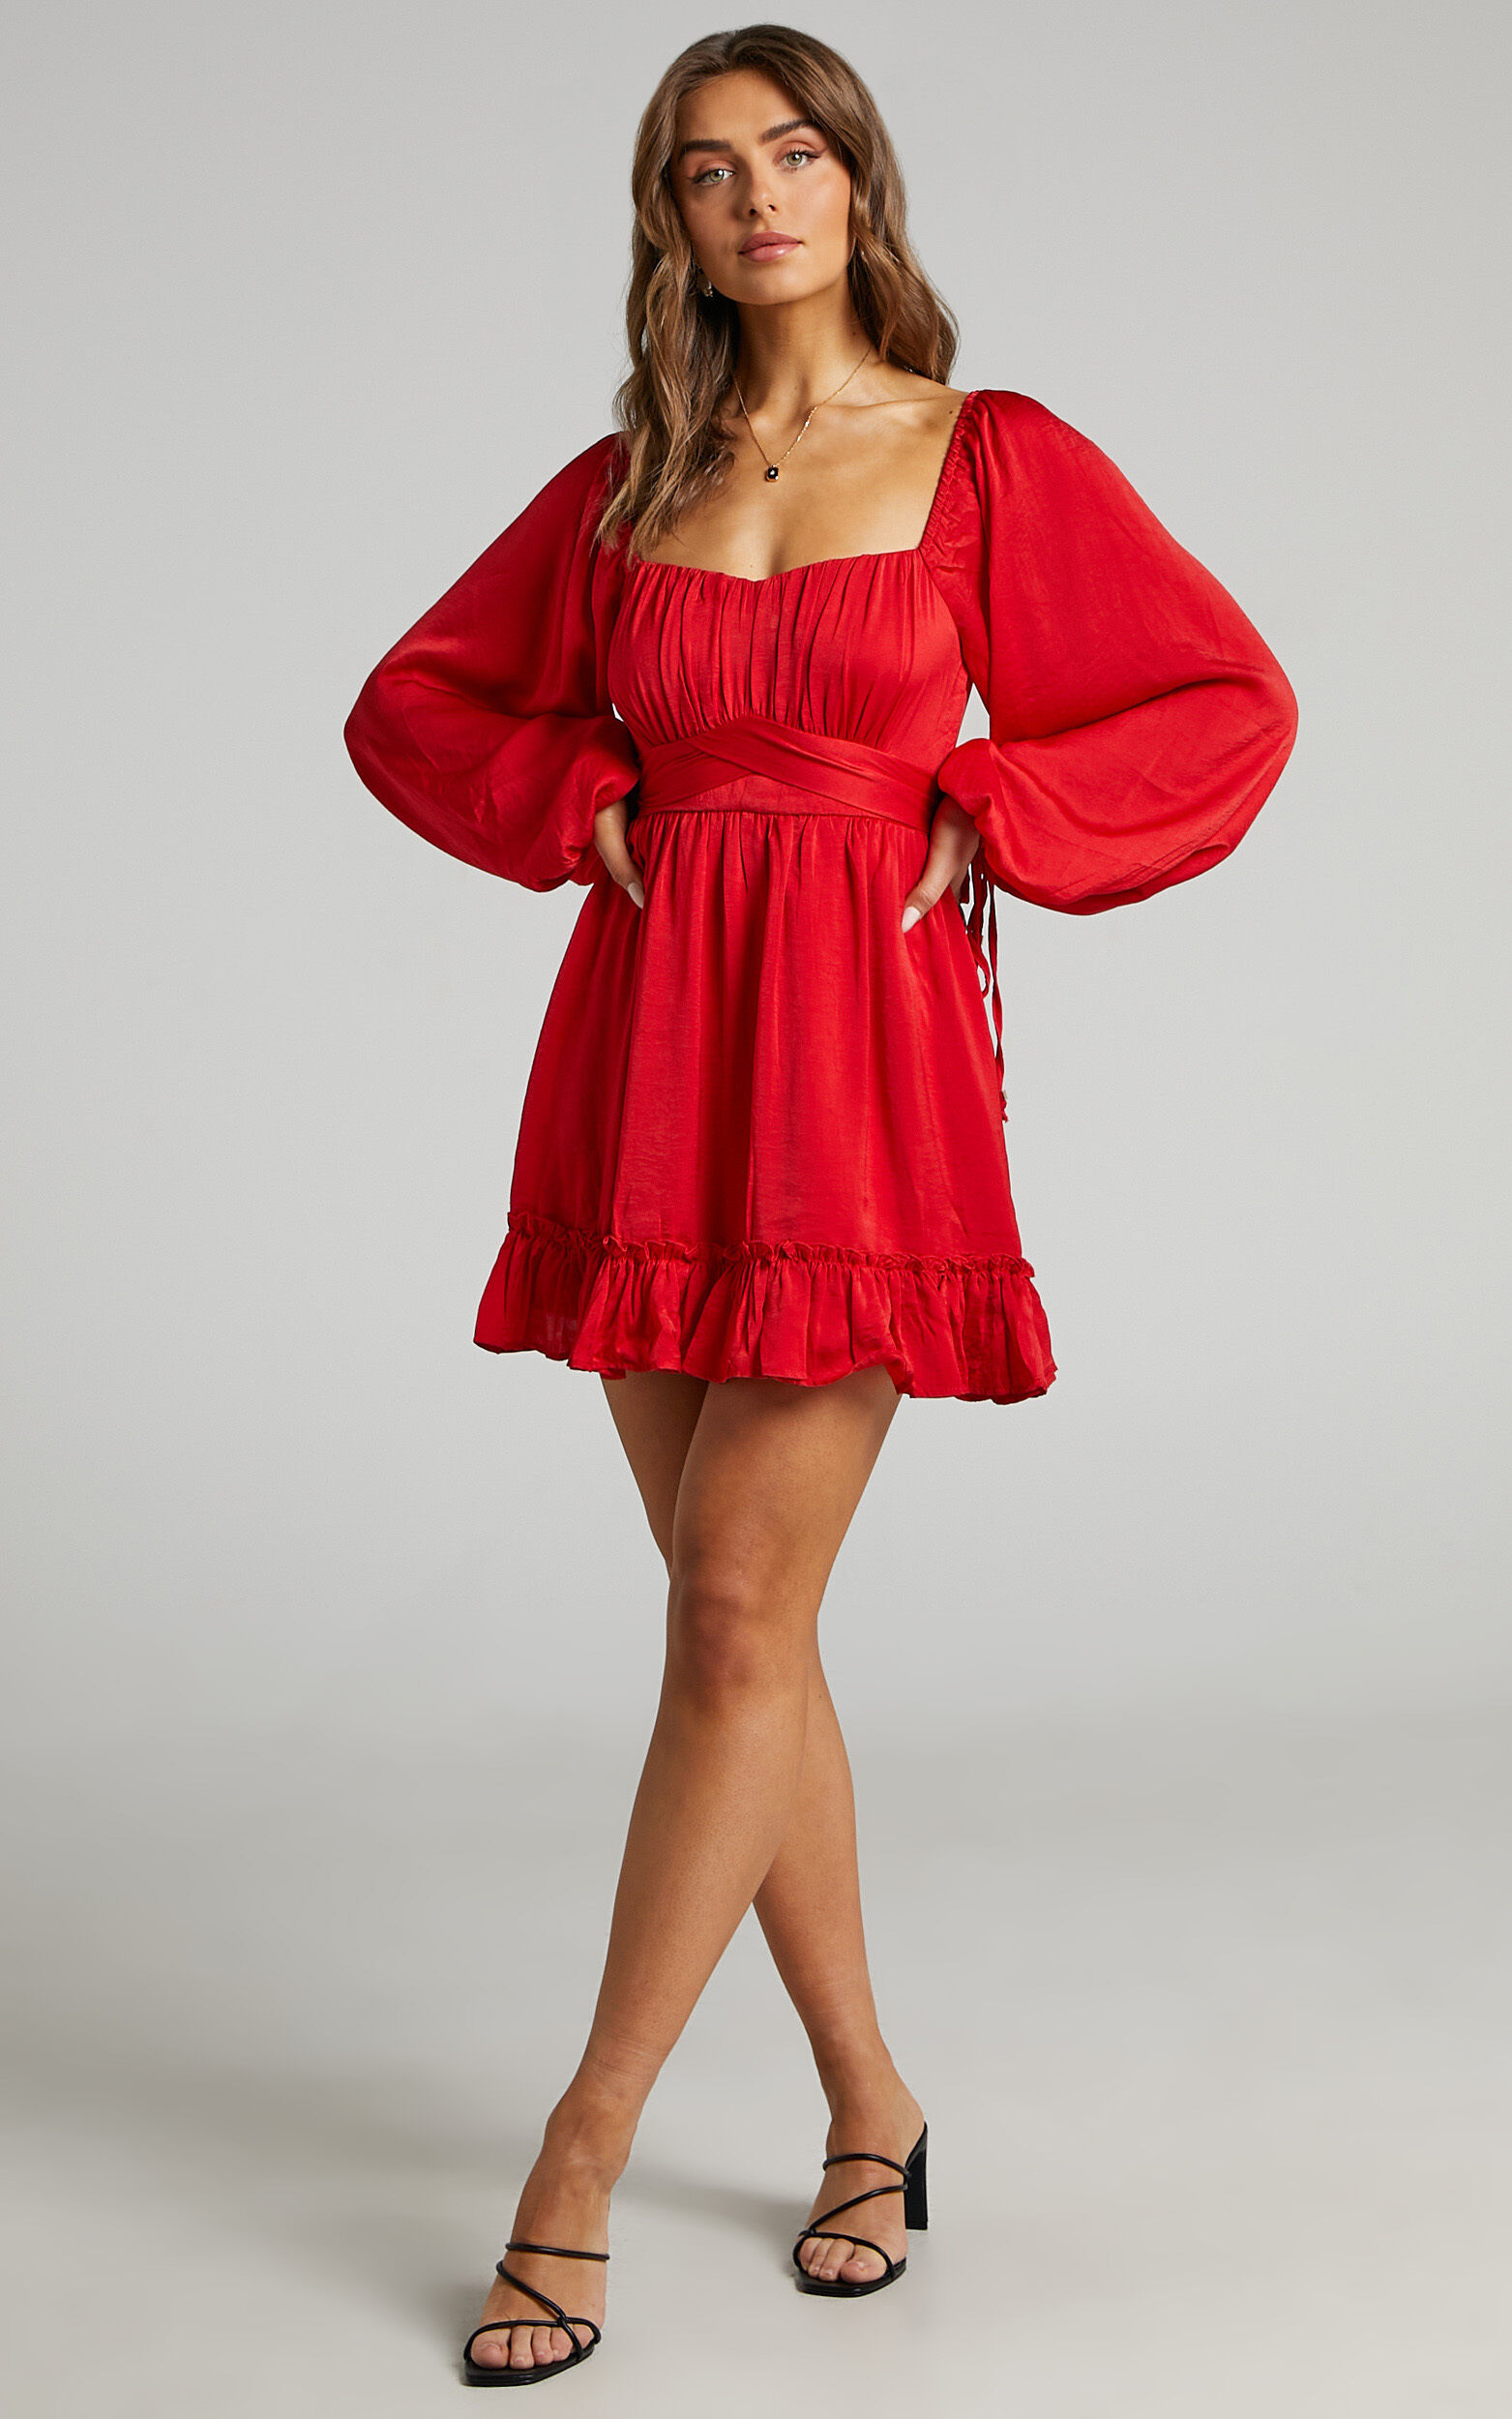 Zaire Mini Dress with Bodice Detailing in Oxy Red - 06, RED2, super-hi-res image number null